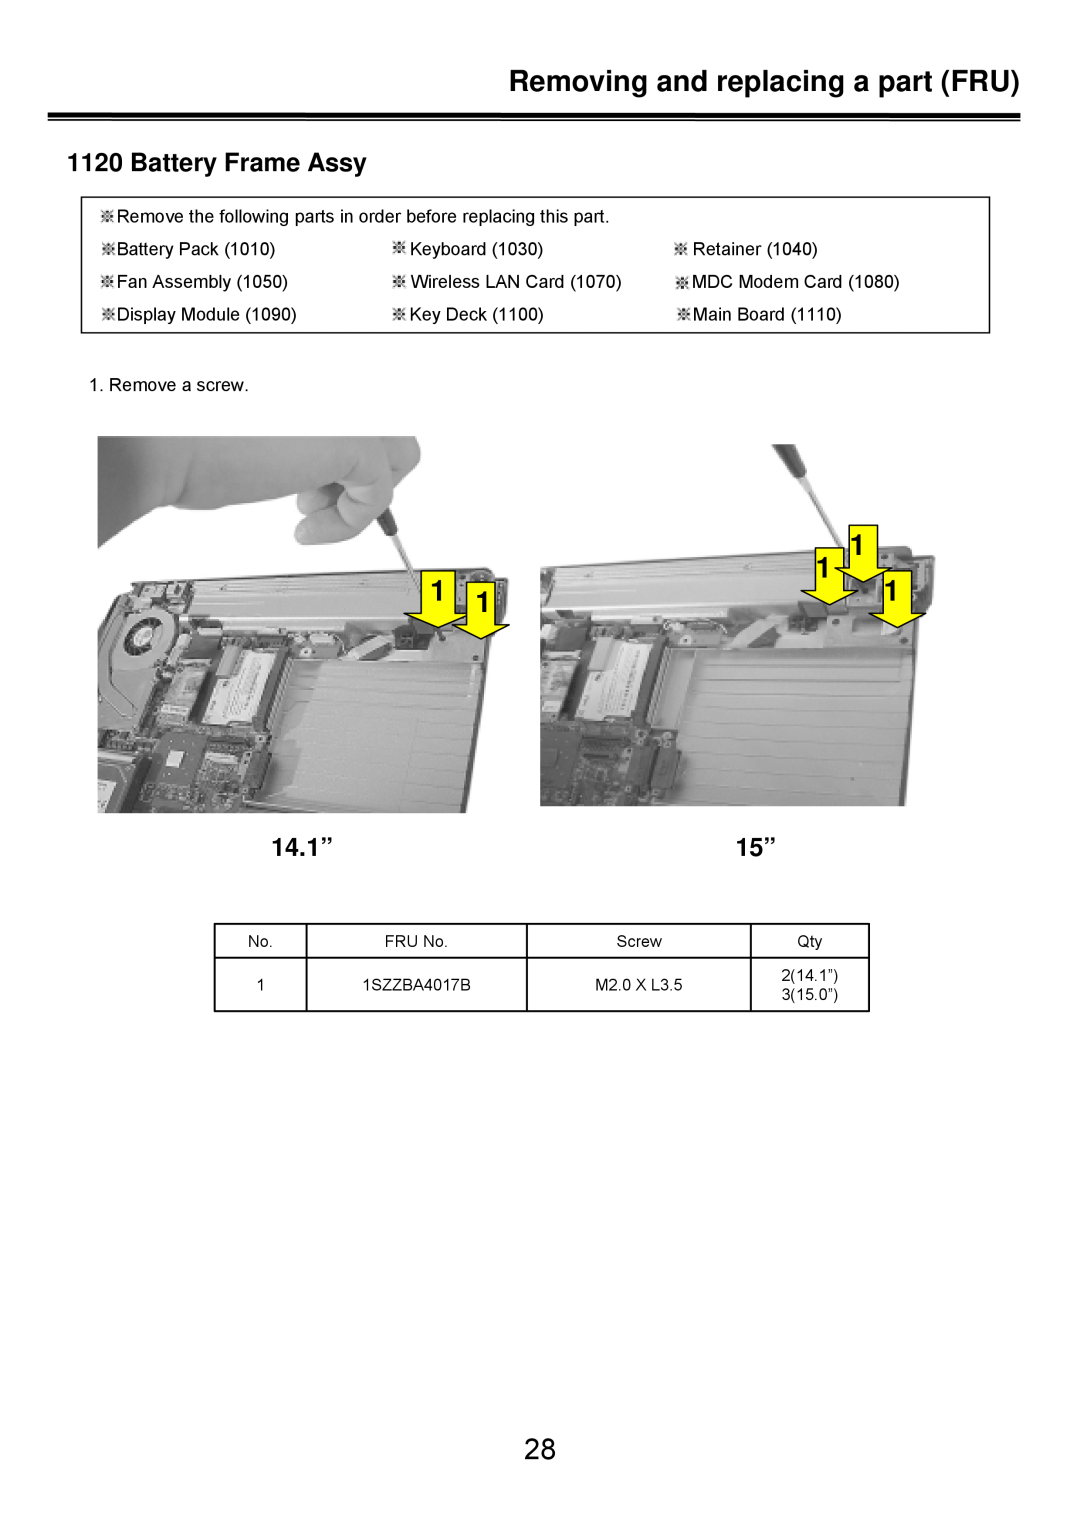 LG Electronics LS50 service manual Battery Frame Assy, 214.1”, 315.0”, Removing and replacing a part FRU 